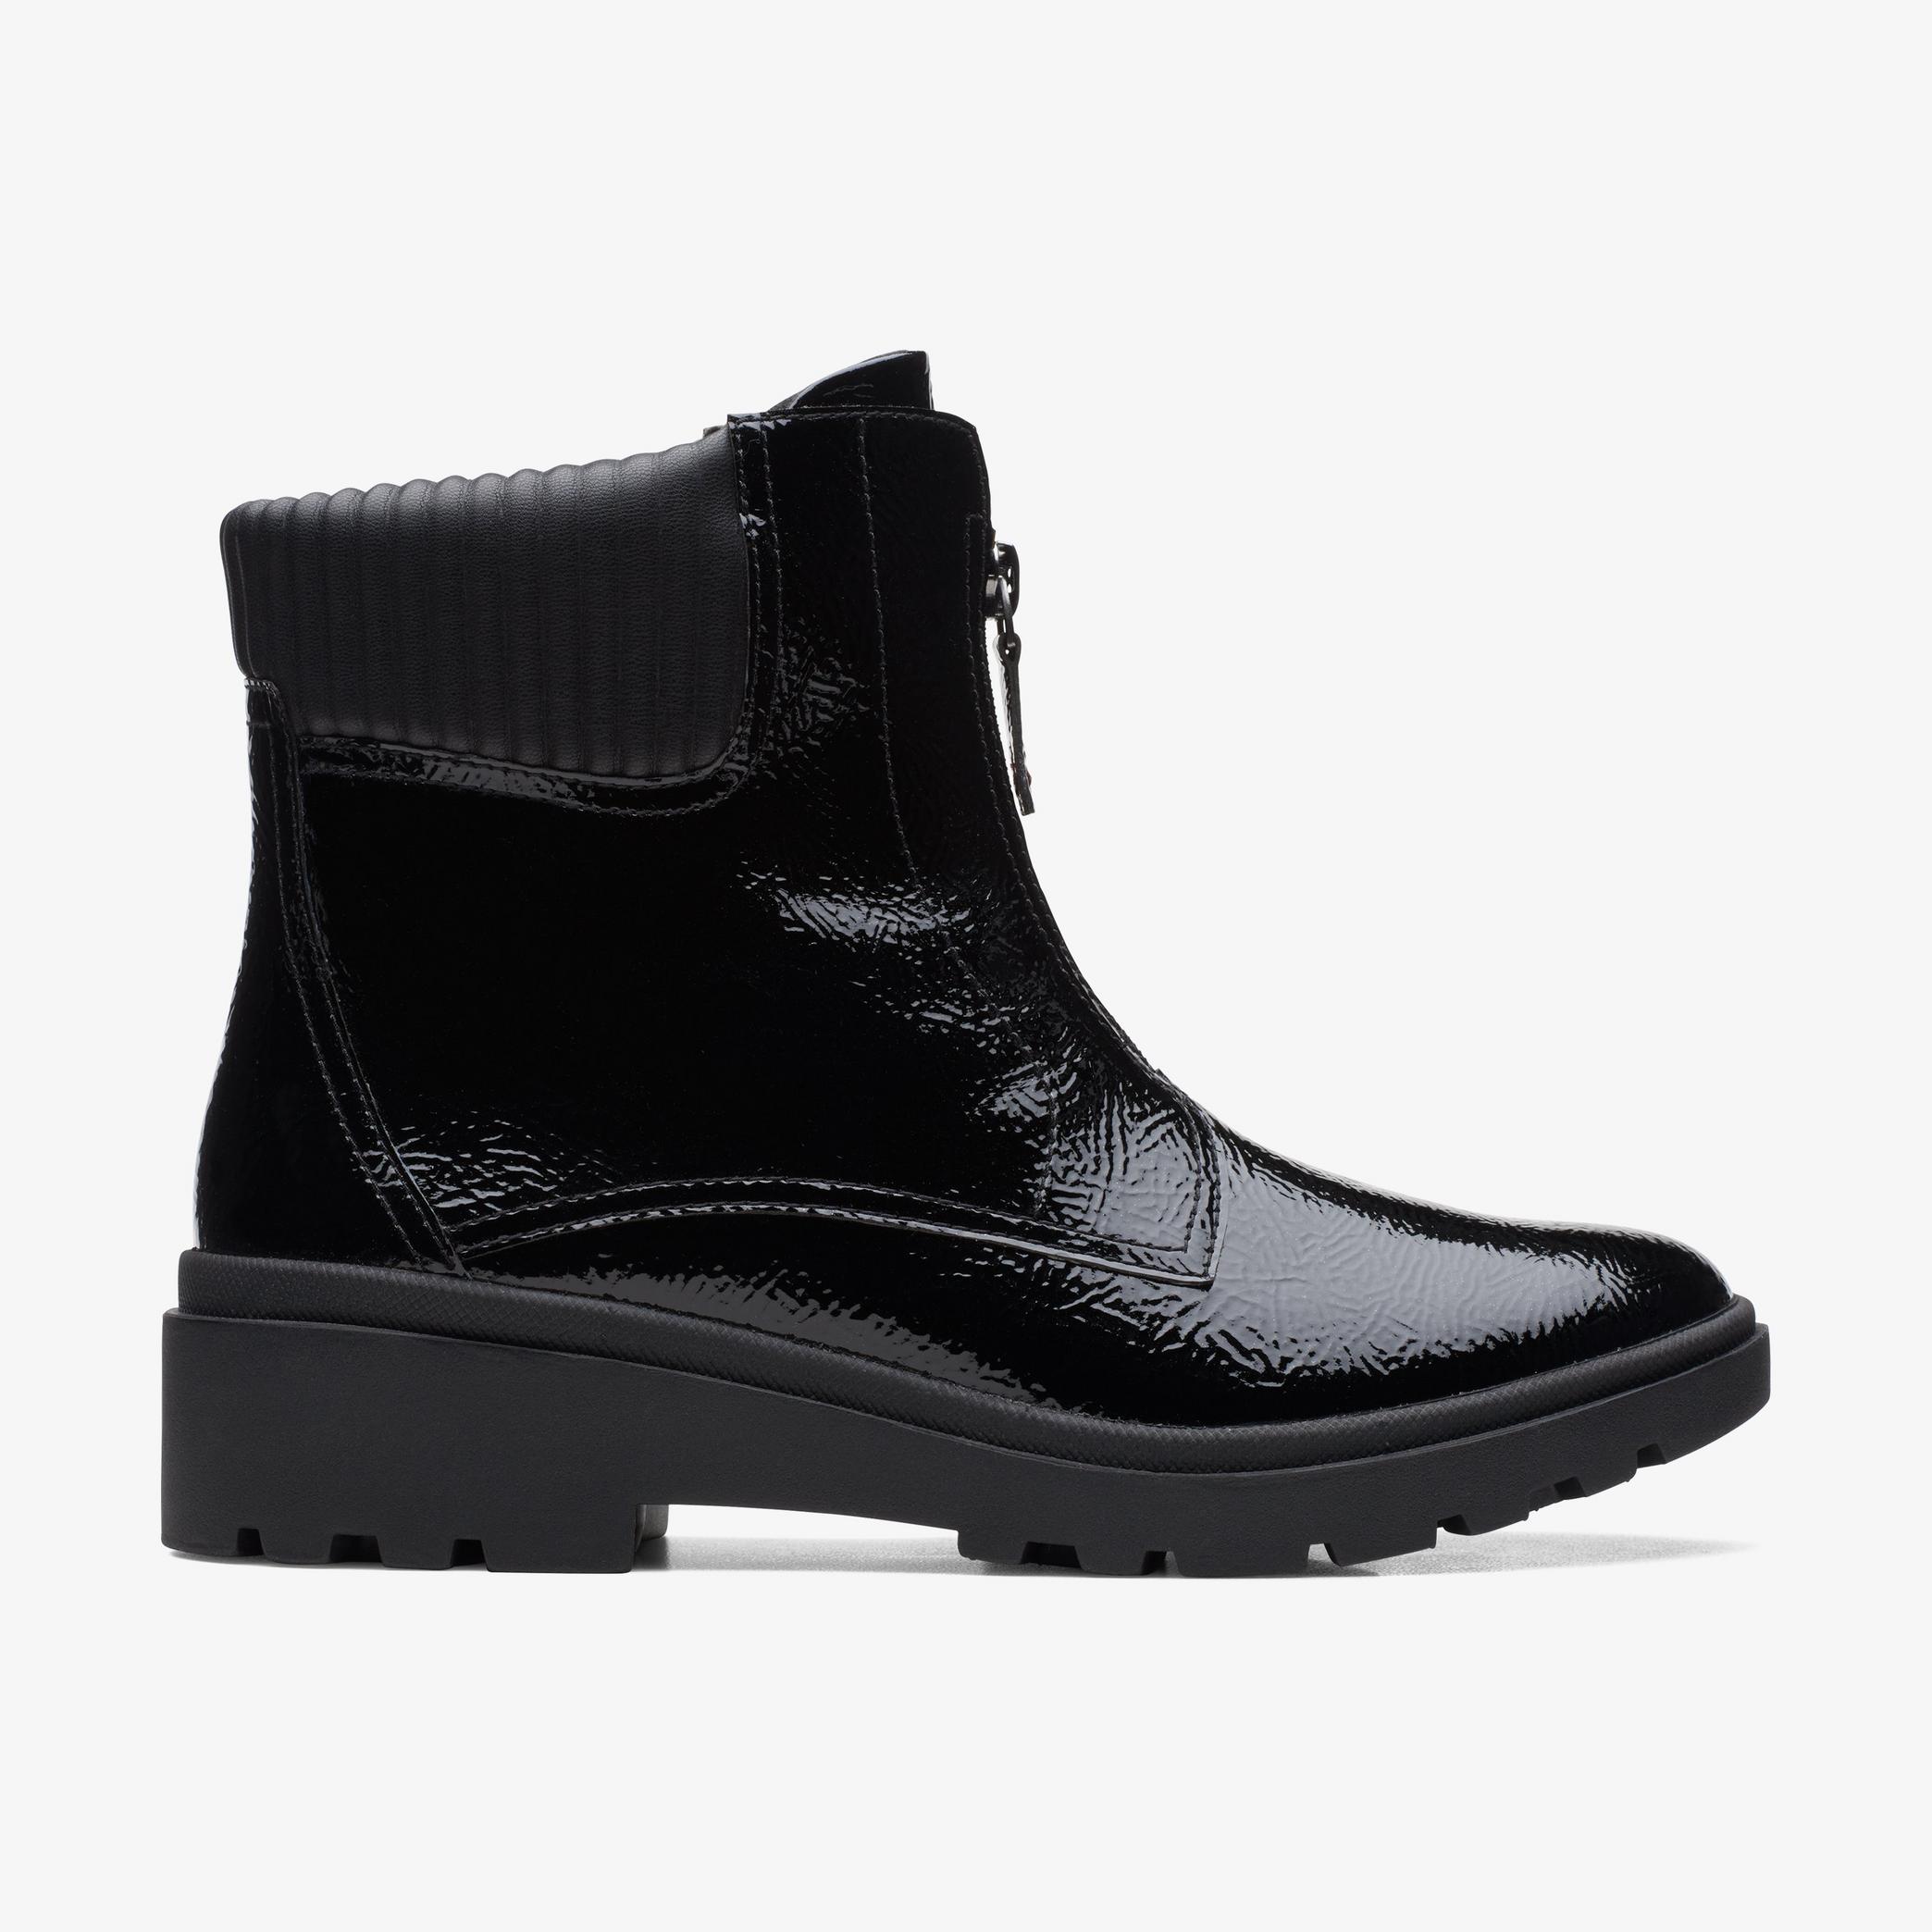 Calla Zip Black Crinkle Patent Ankle Boots, view 1 of 6